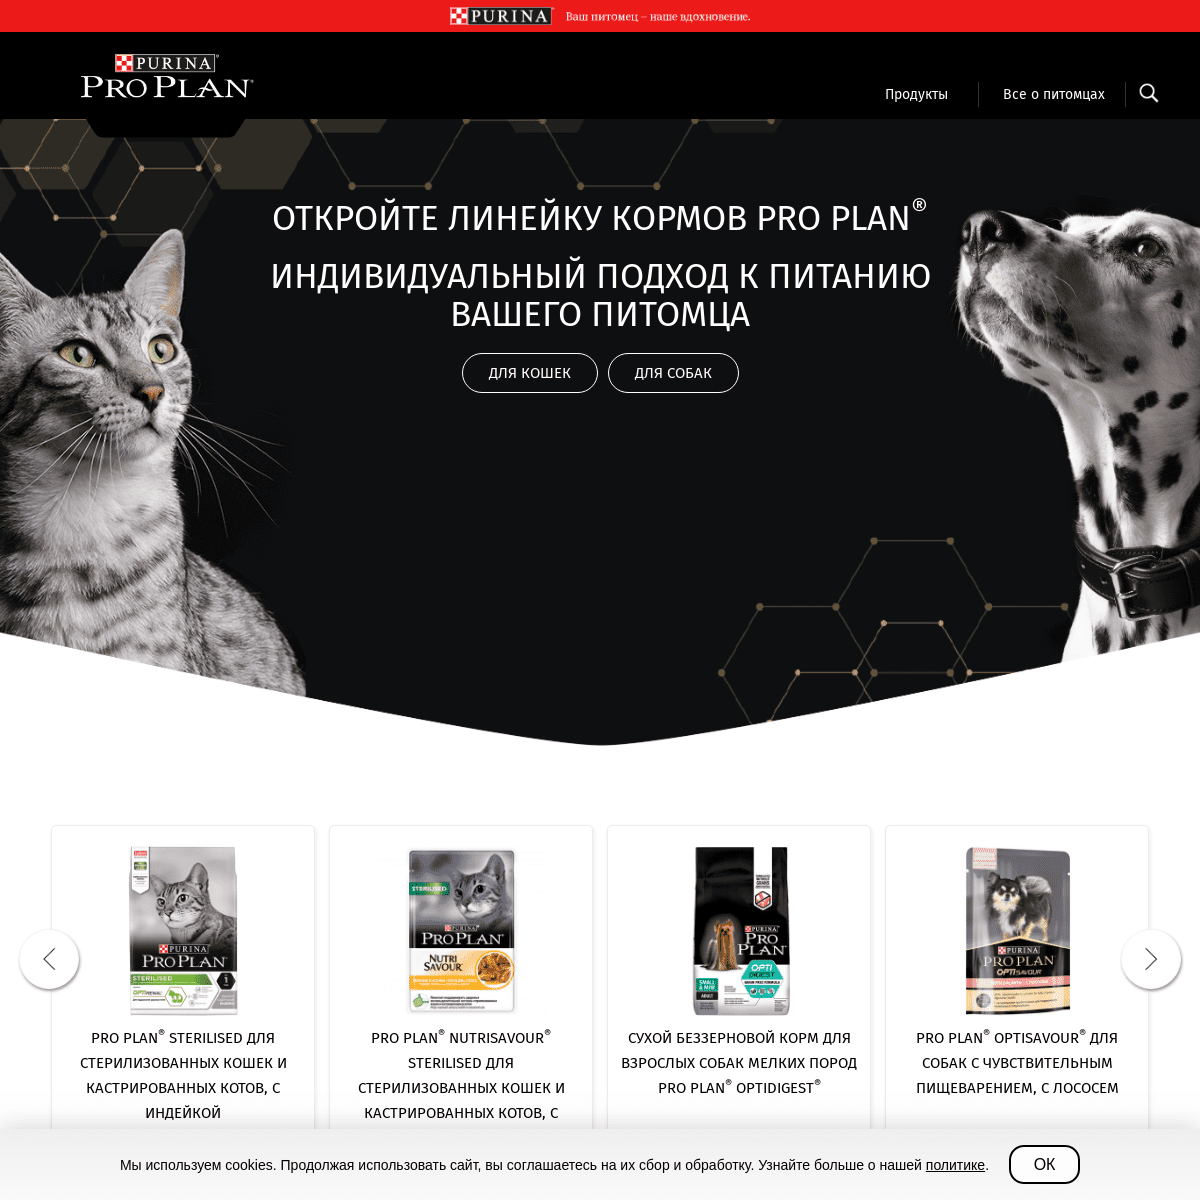 A complete backup of proplan.ru